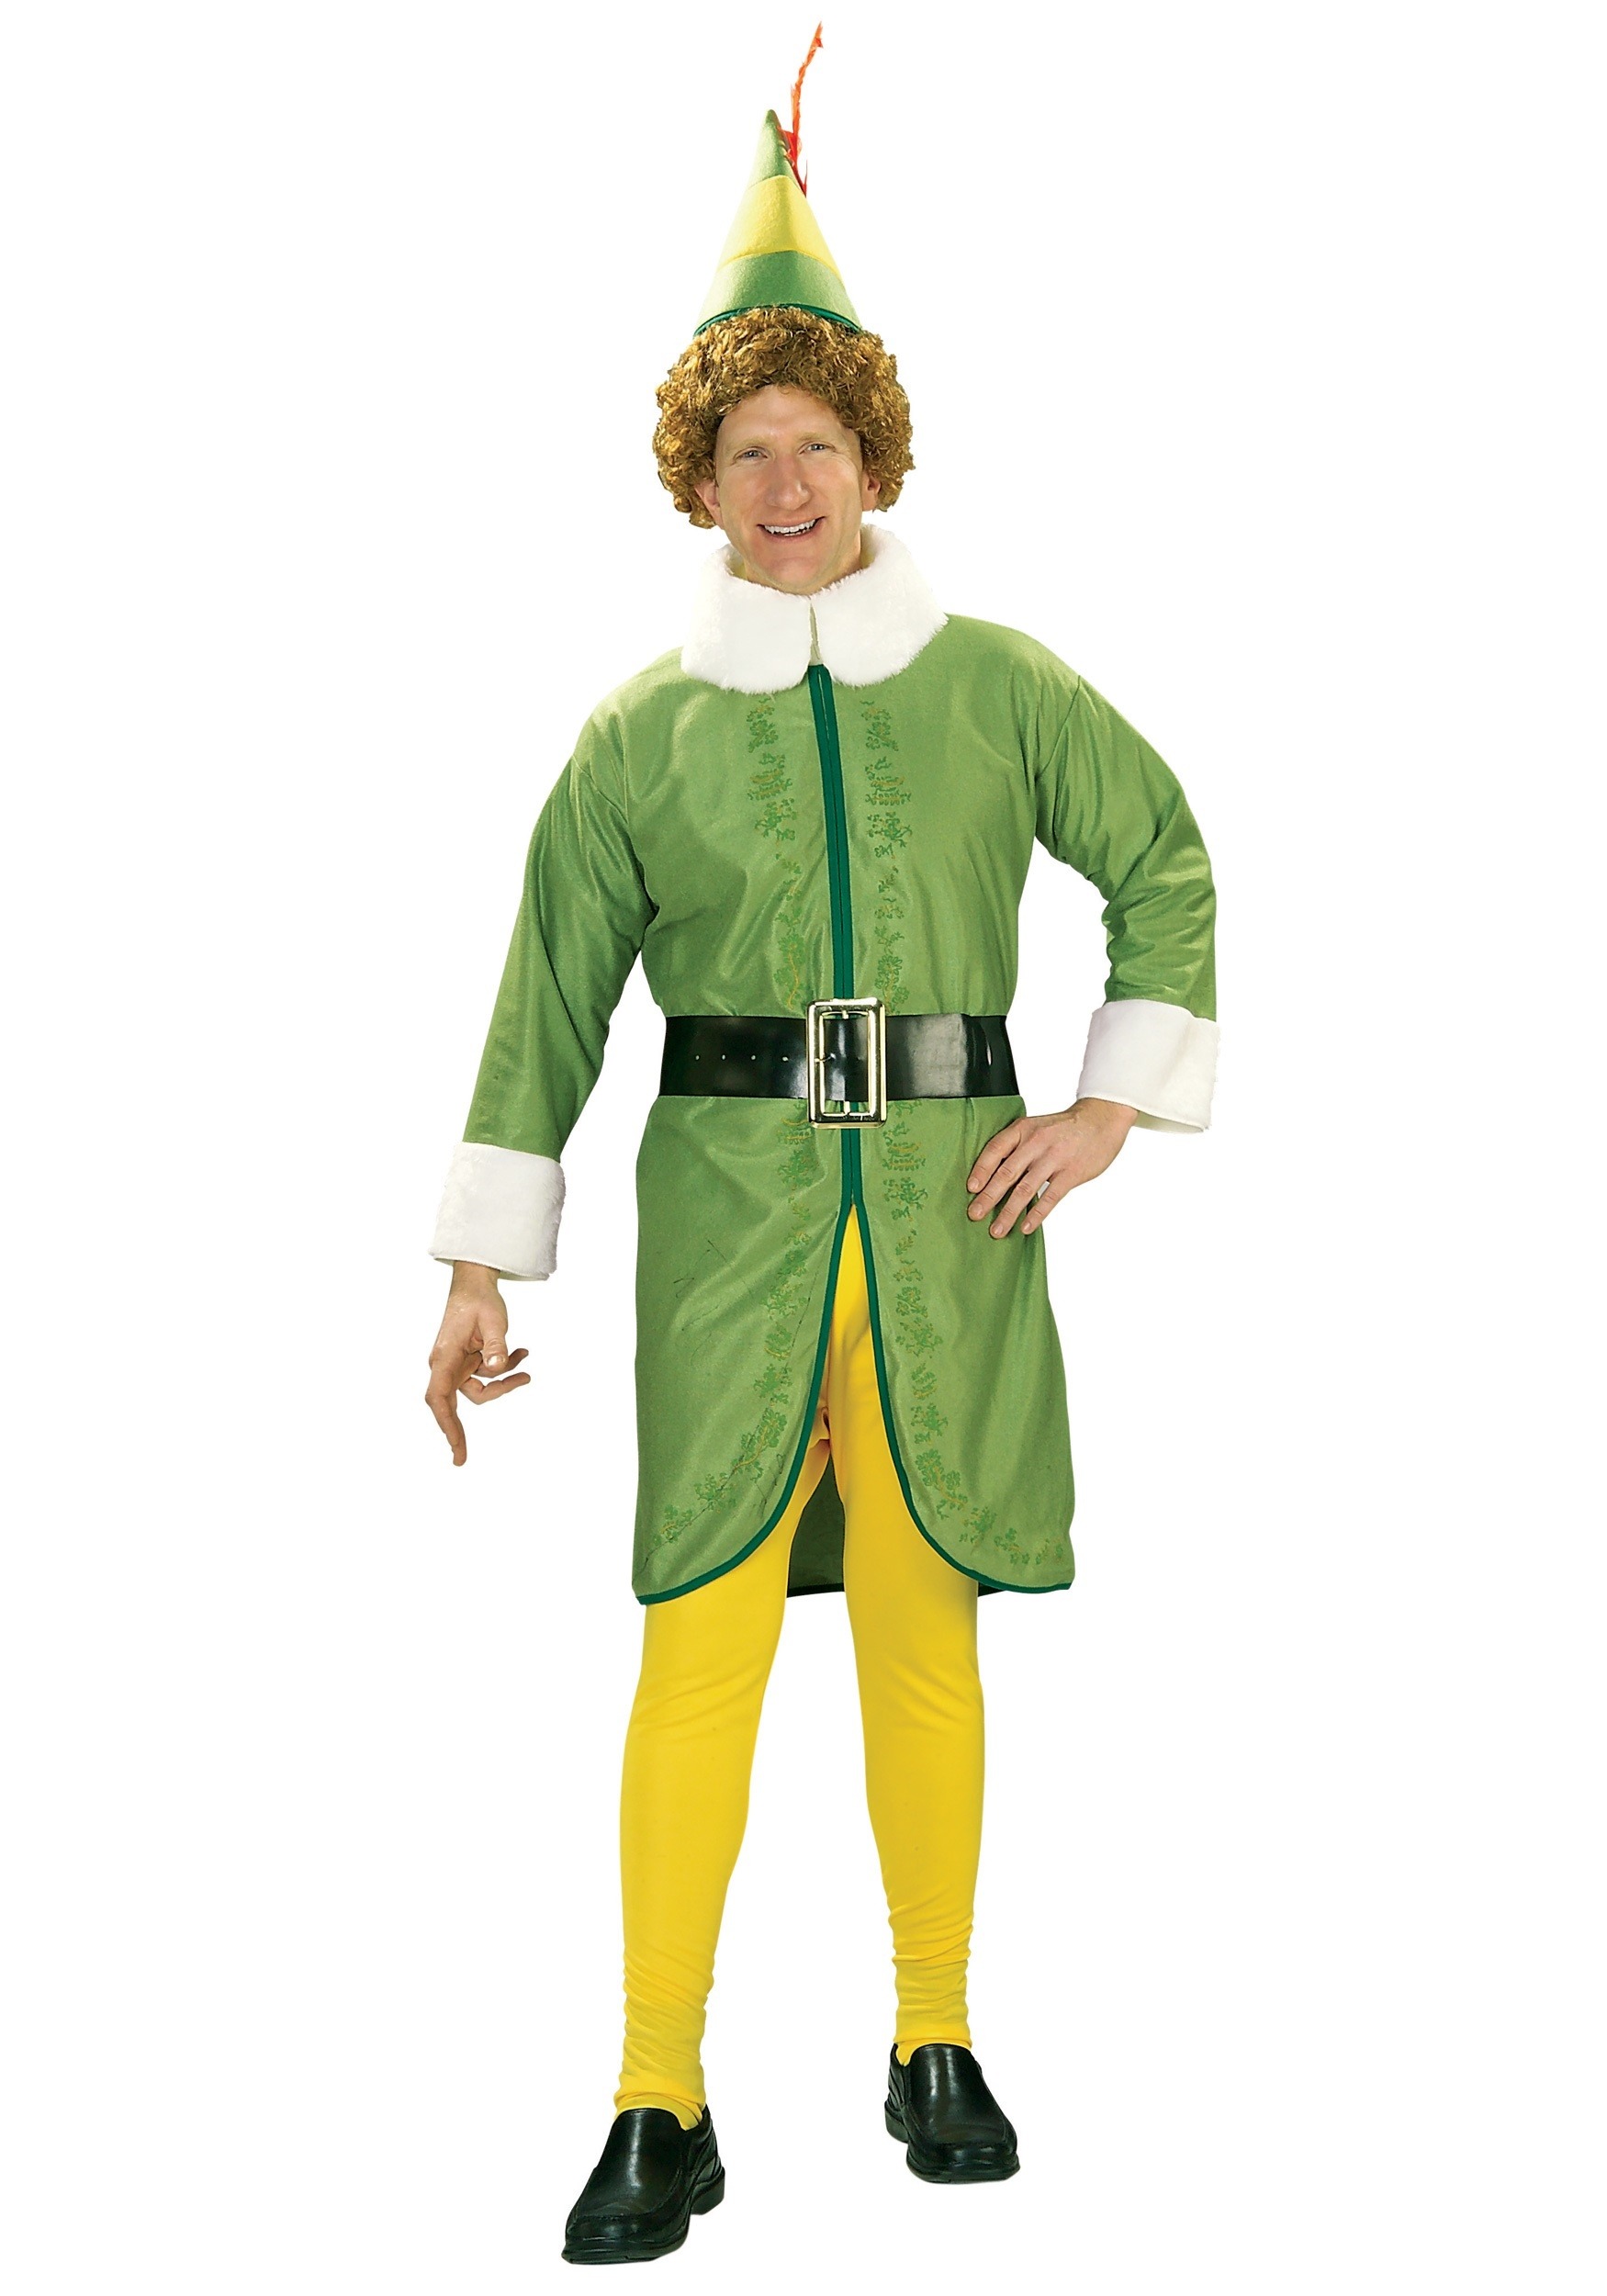 Image of Buddy the Elf Costume for Adults ID RU880419-ST